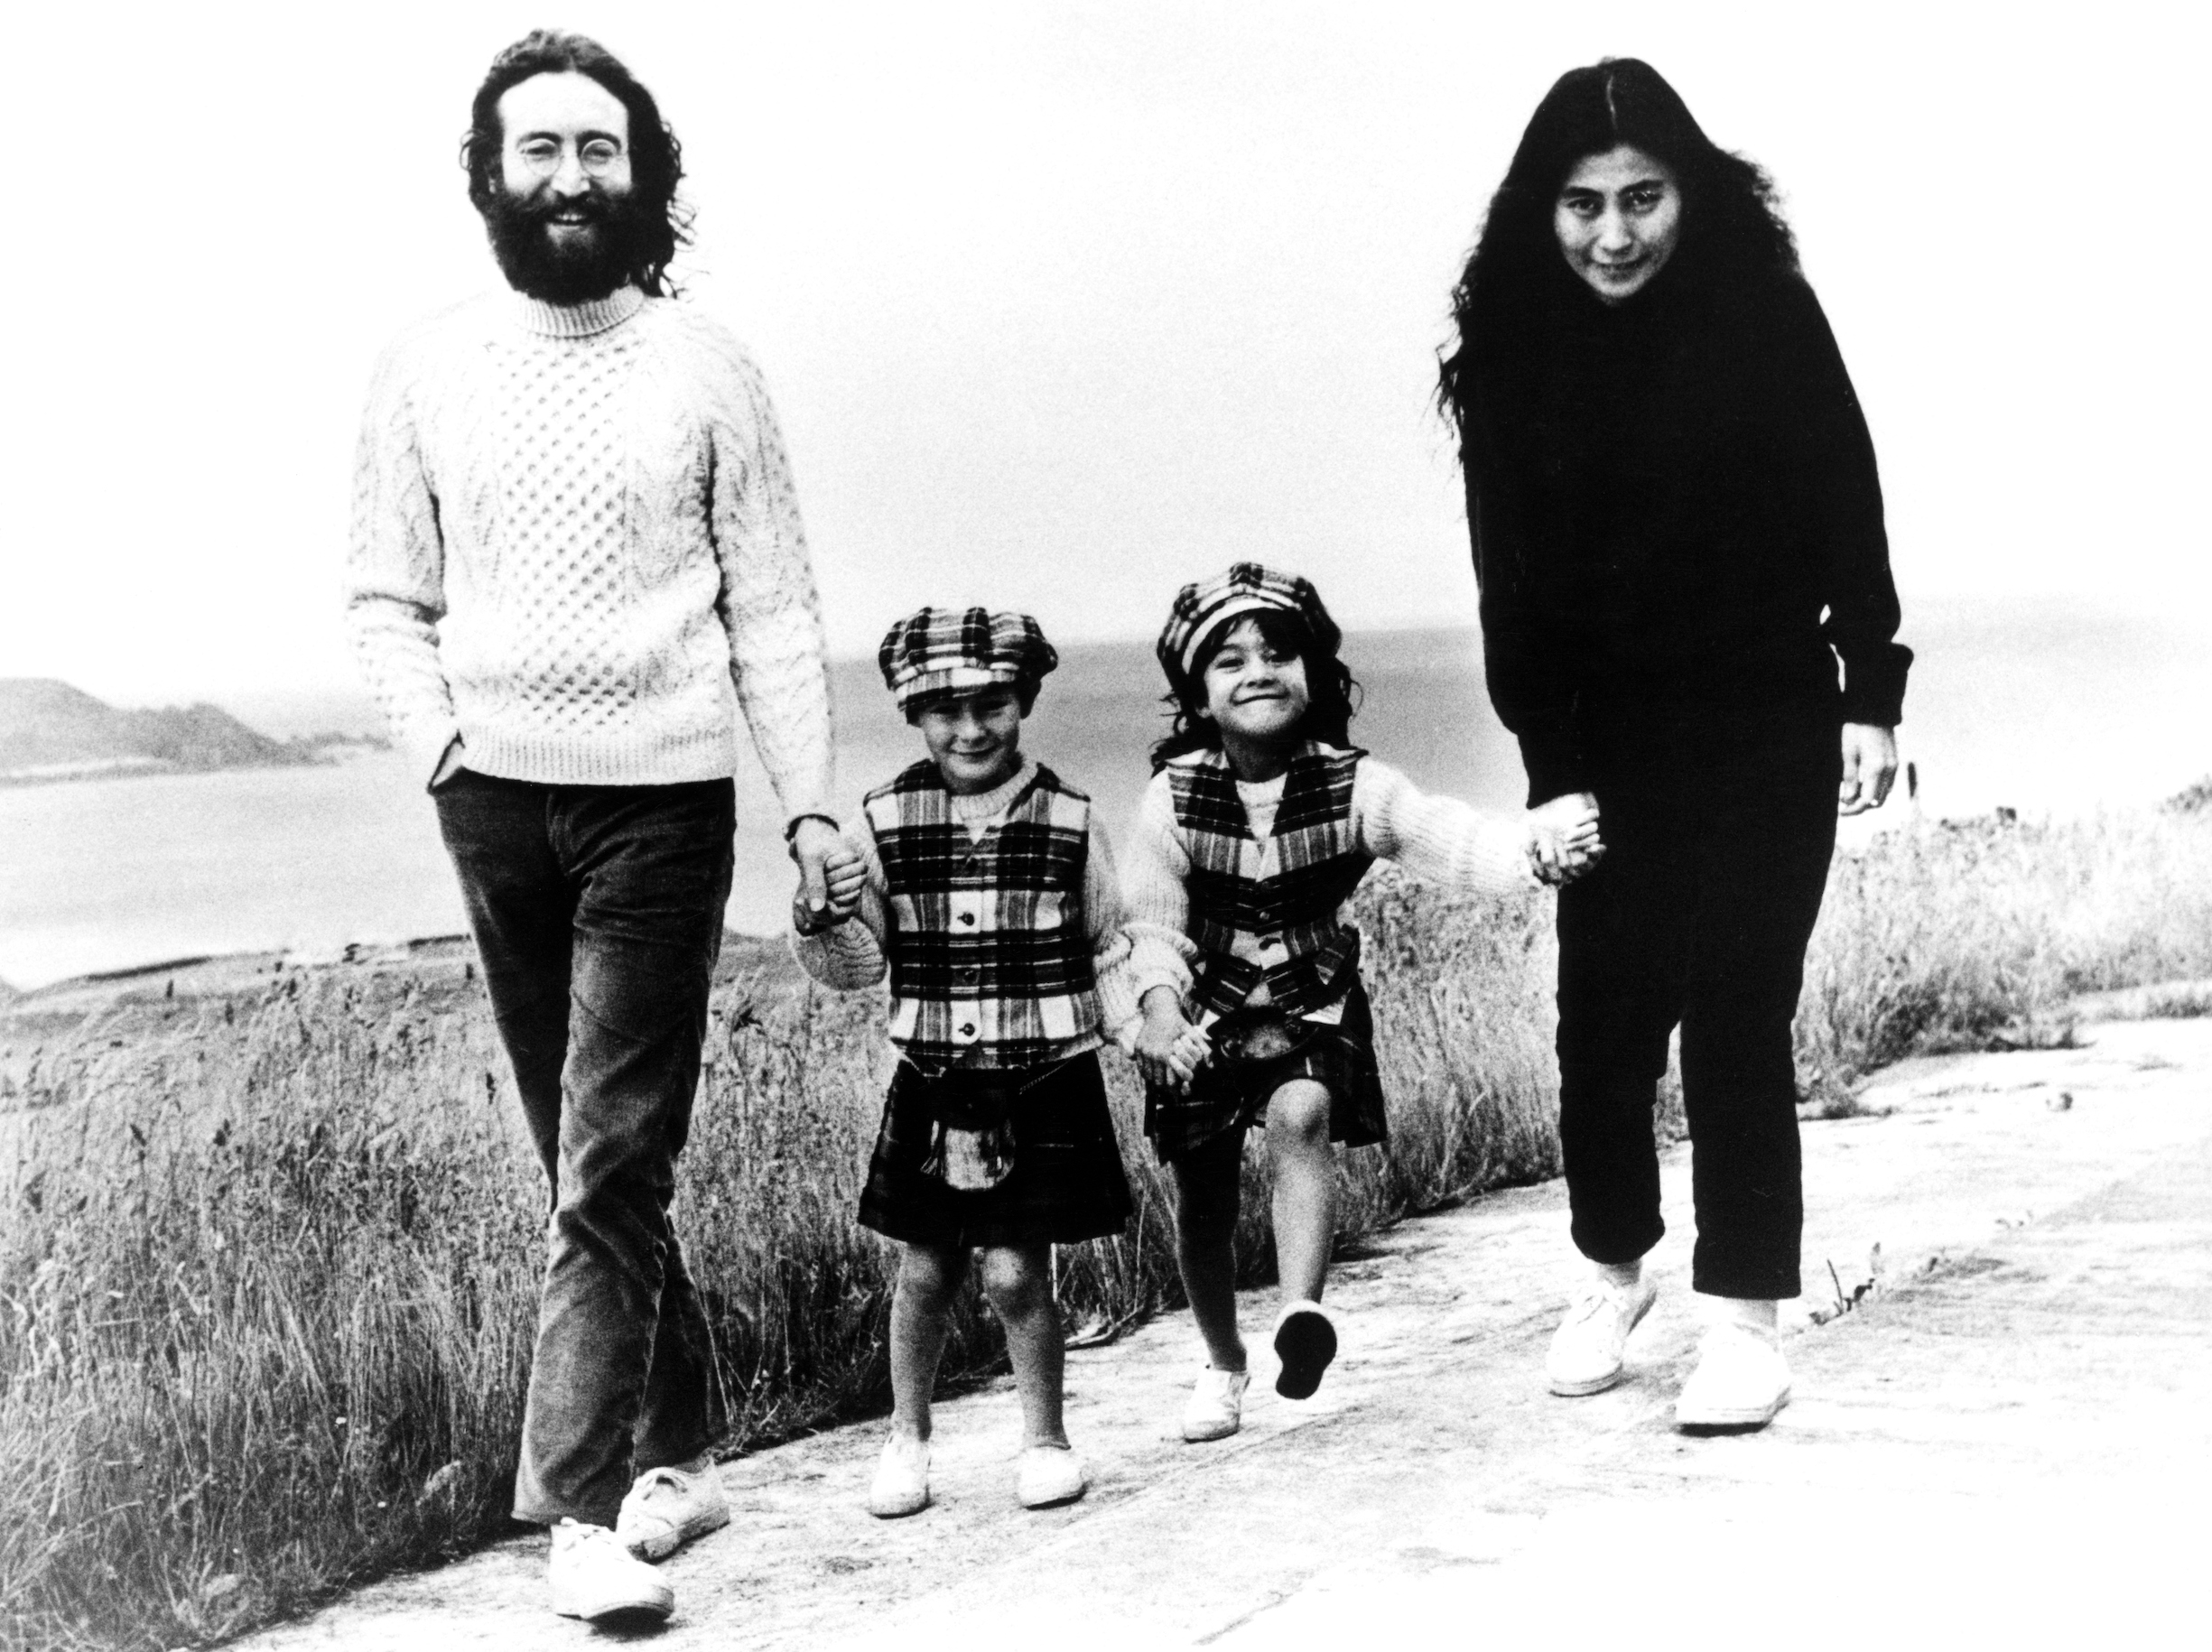 John Lennon and Yoko Ono with their children from previous marriages Julian Lennon, 6, and daughter Kyoko, 5, pictured taking a walk during their Scottish Holiday